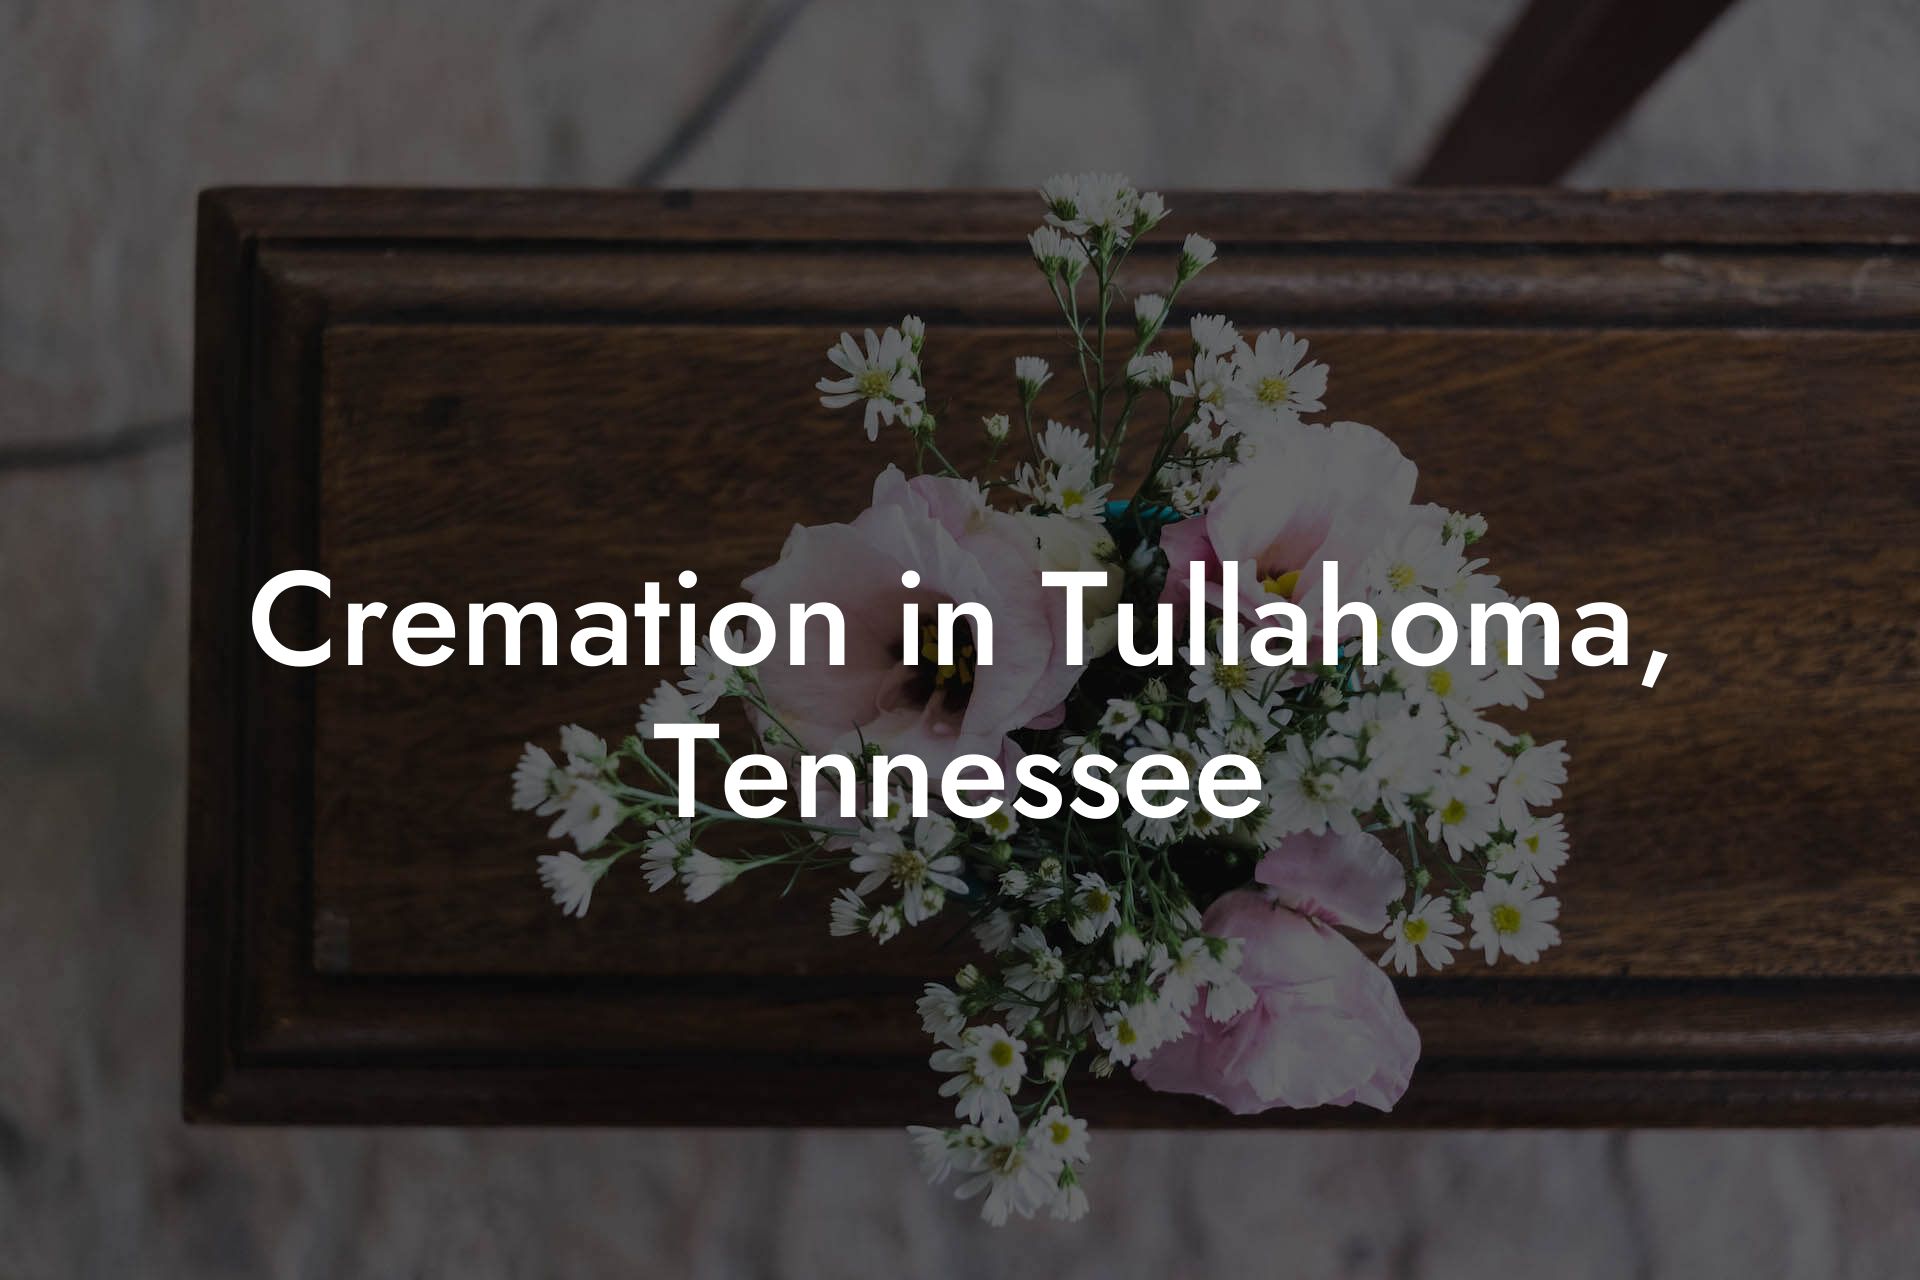 Cremation in Tullahoma, Tennessee